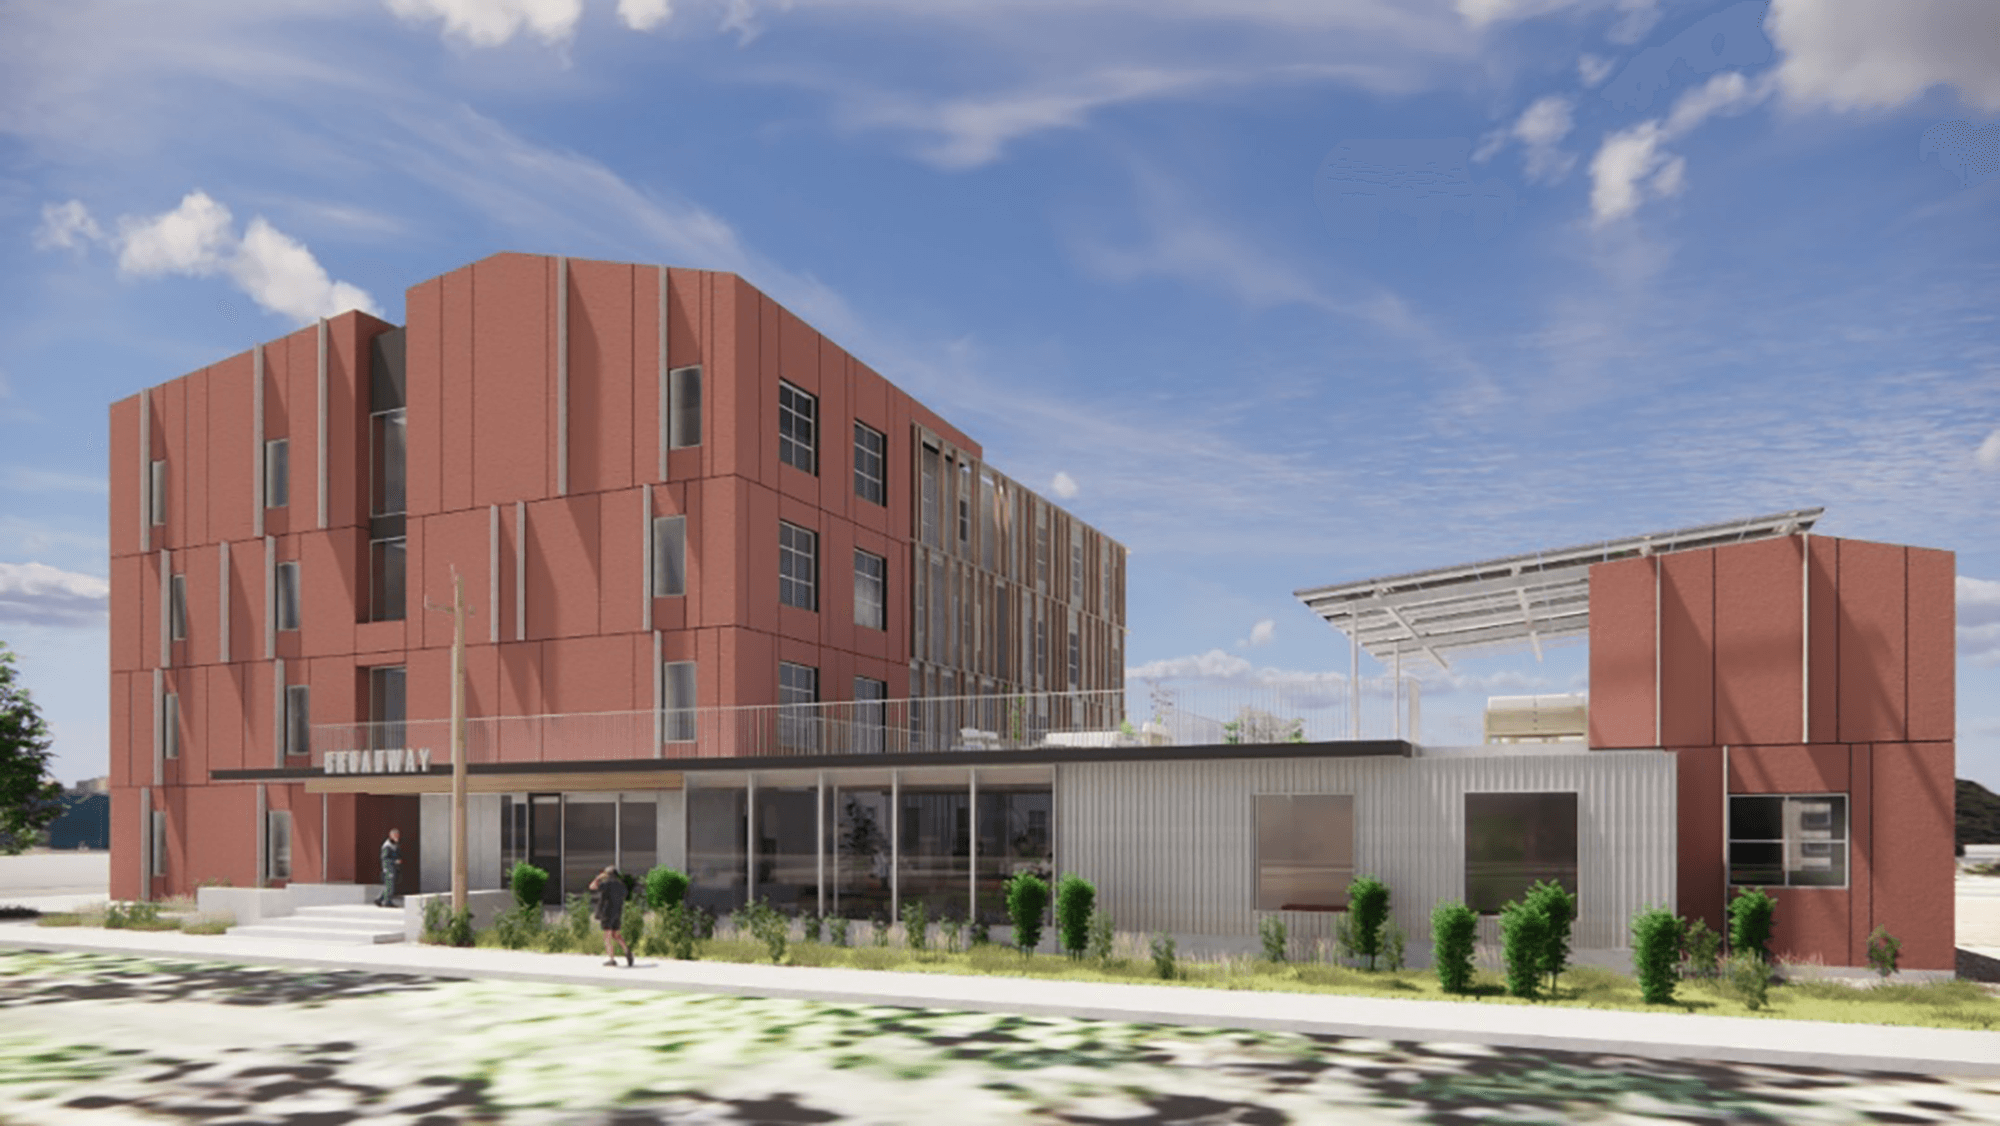 A rendering of a planned supportive housing project